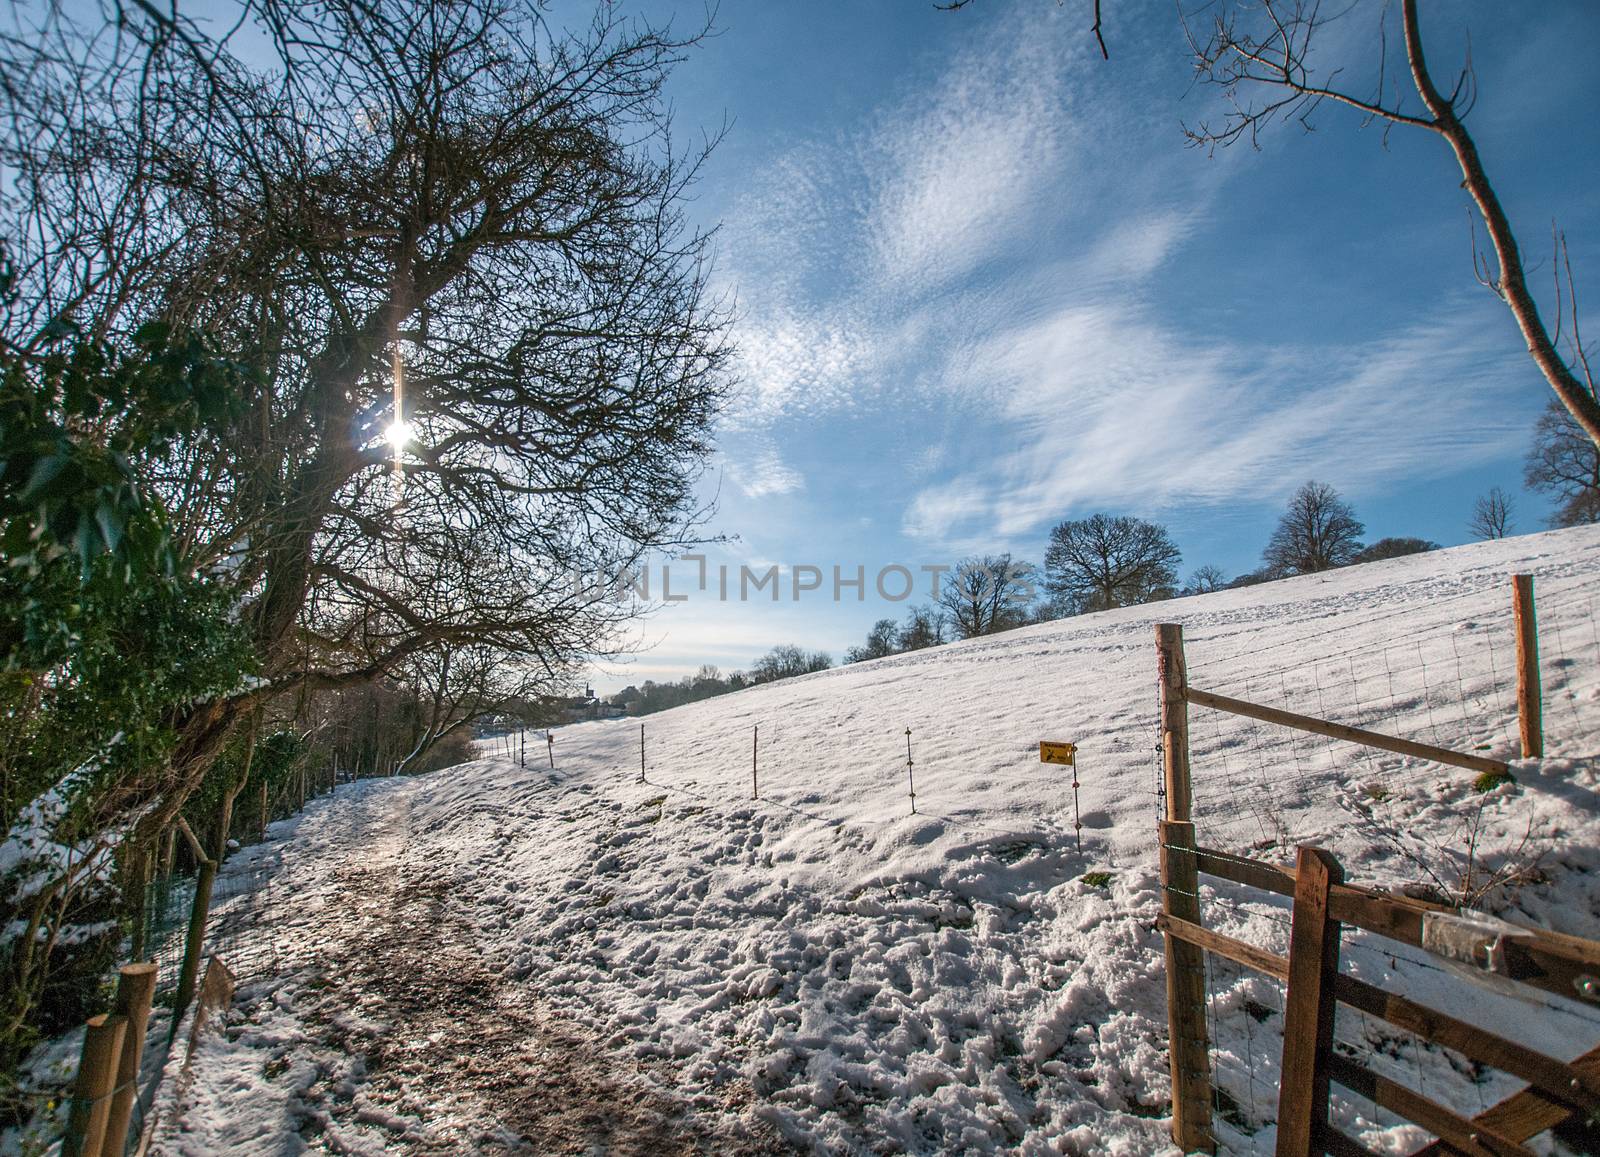 a snowy scene on the outskirts of bath by sirspread